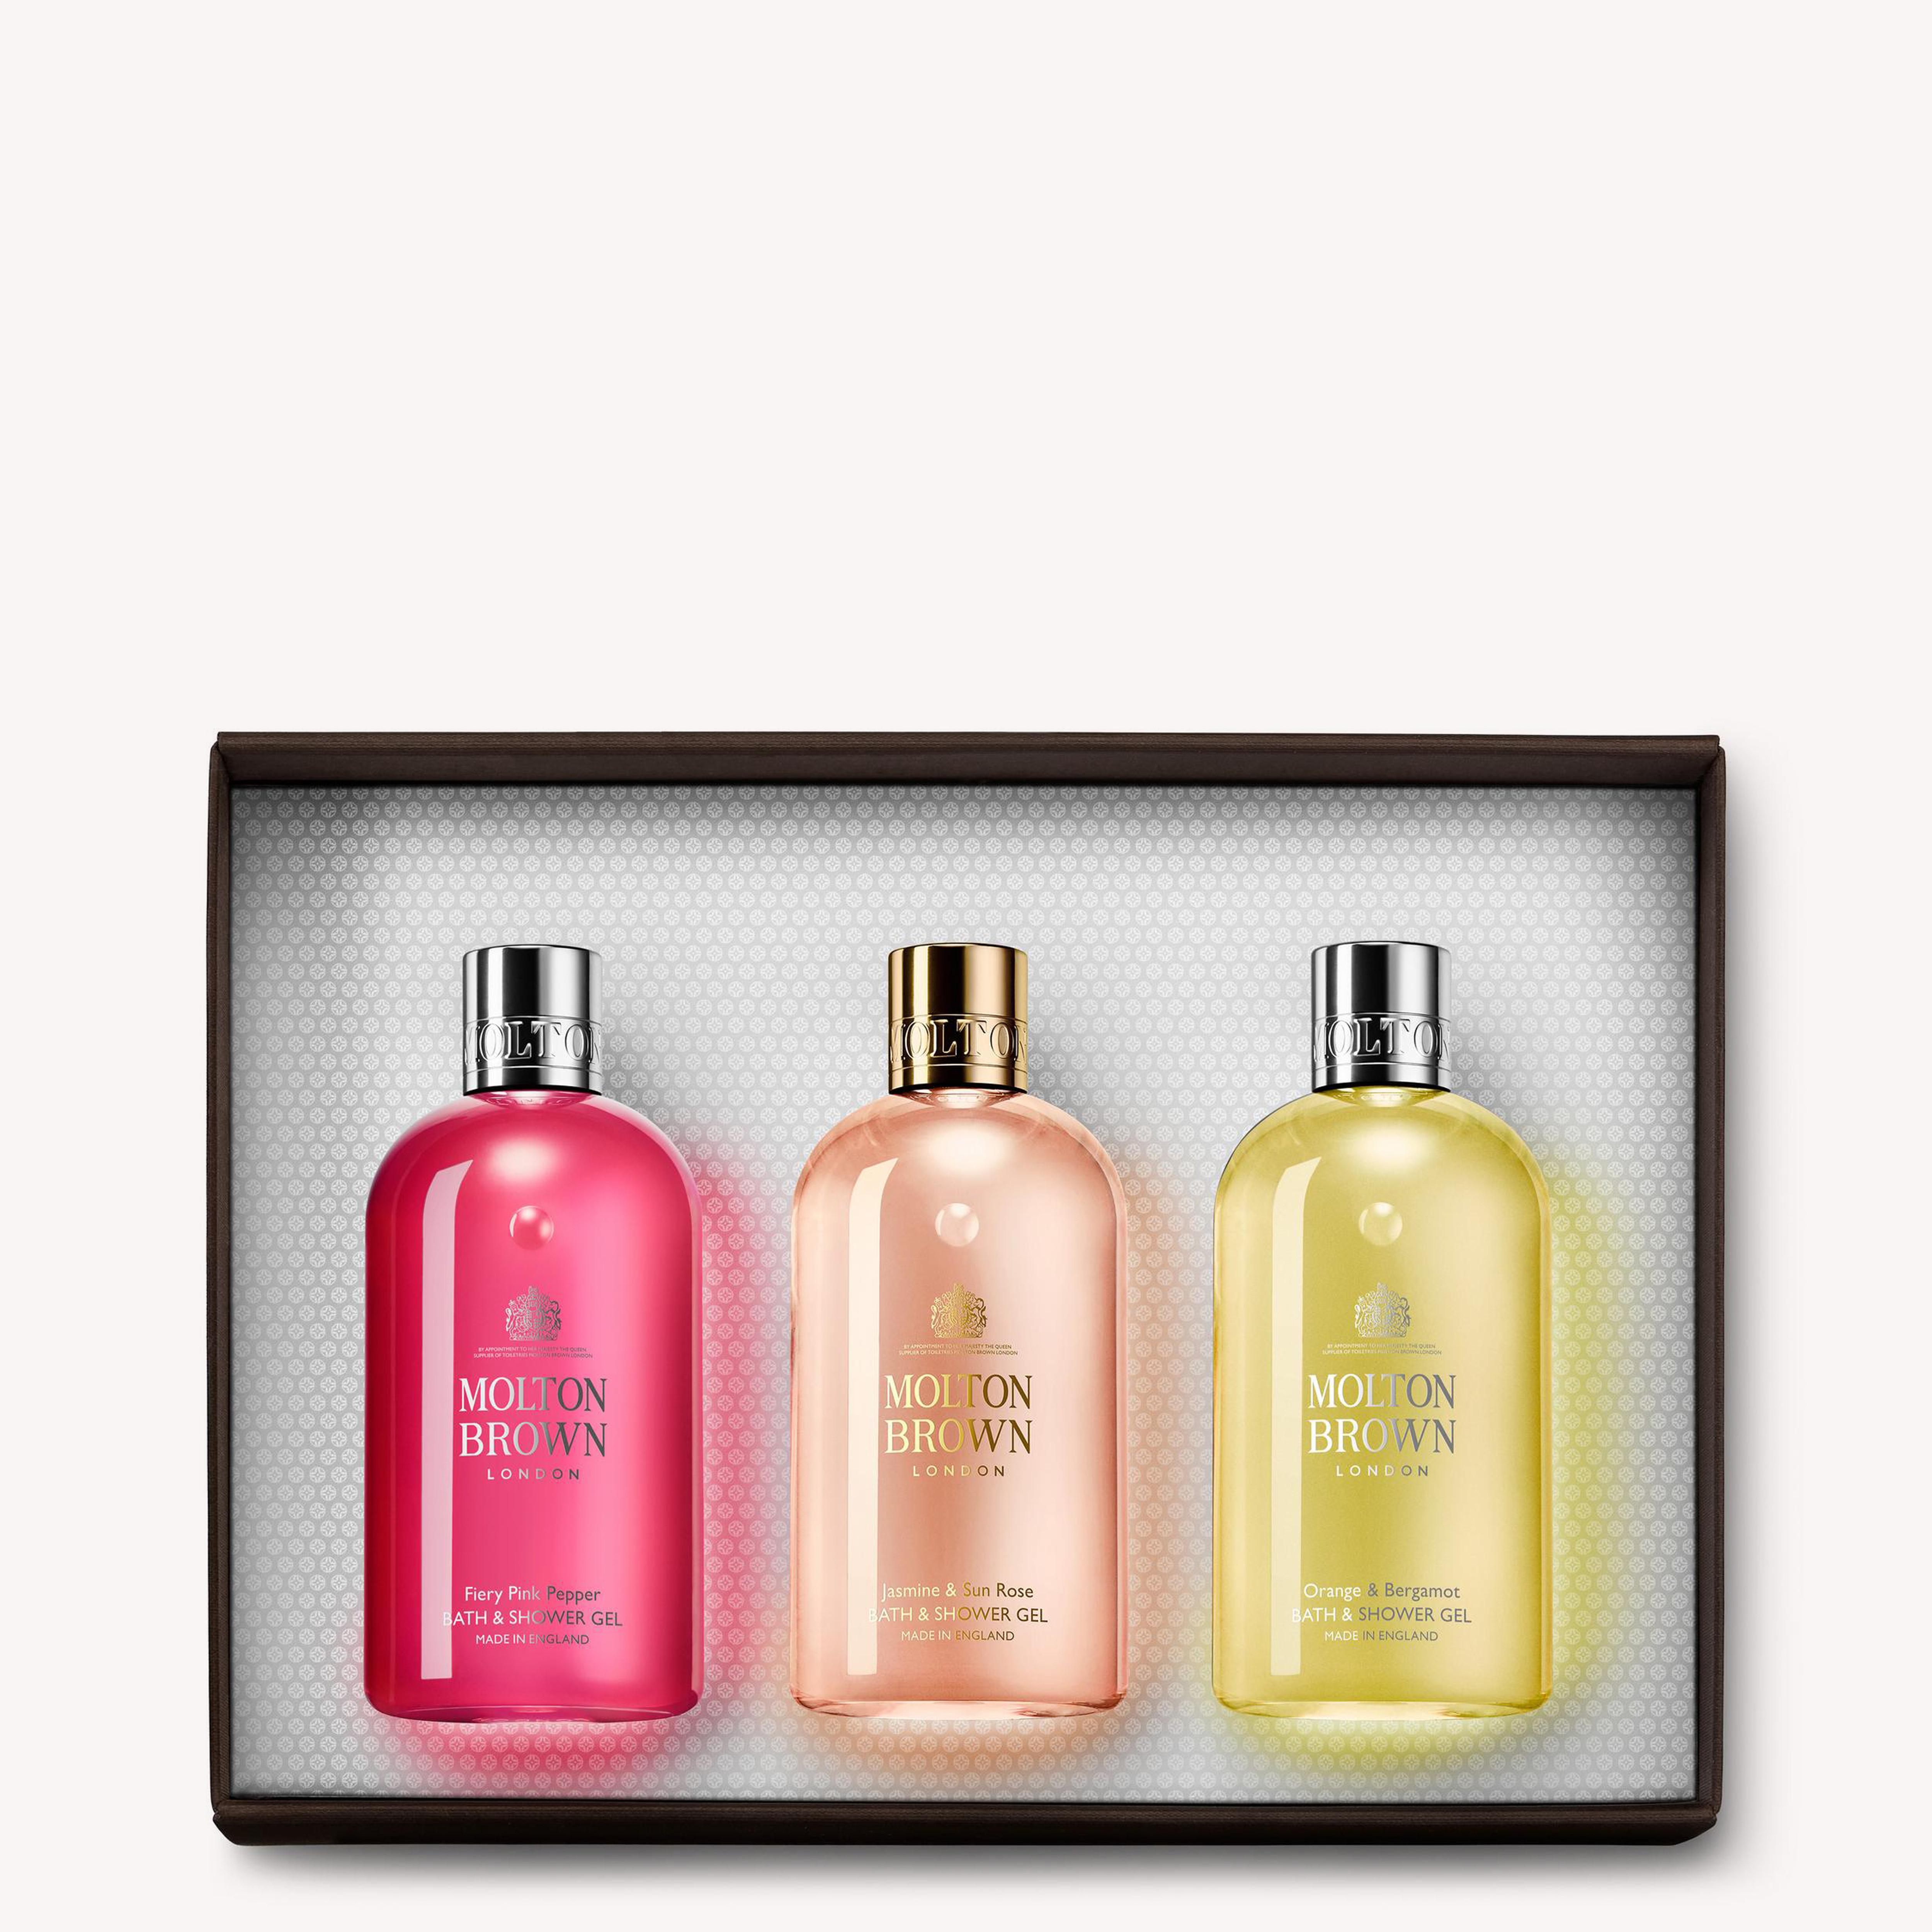 Molton Brown Floral & Spicy Bathing Gift Set